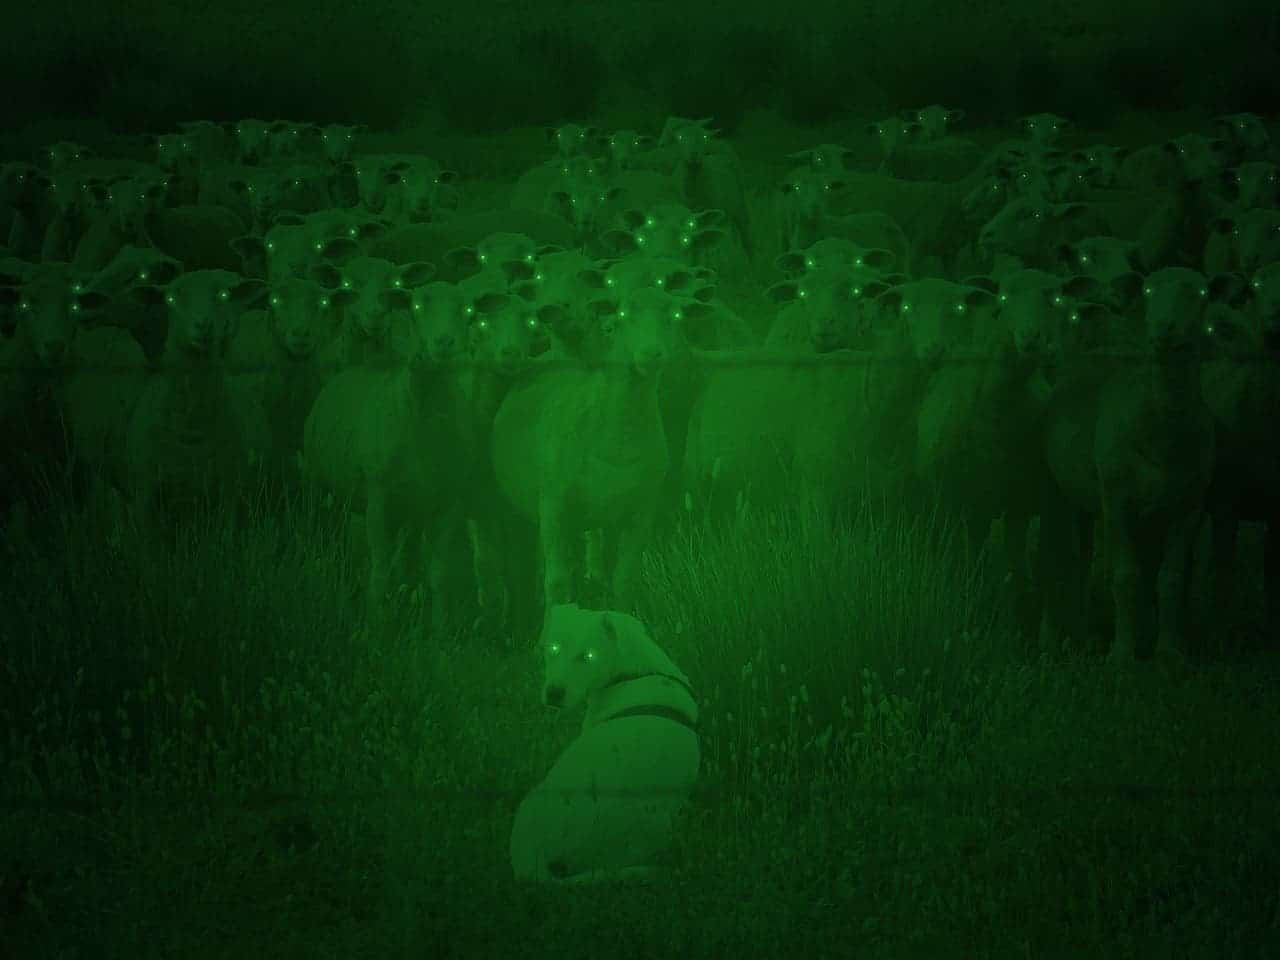 How does night vision work?